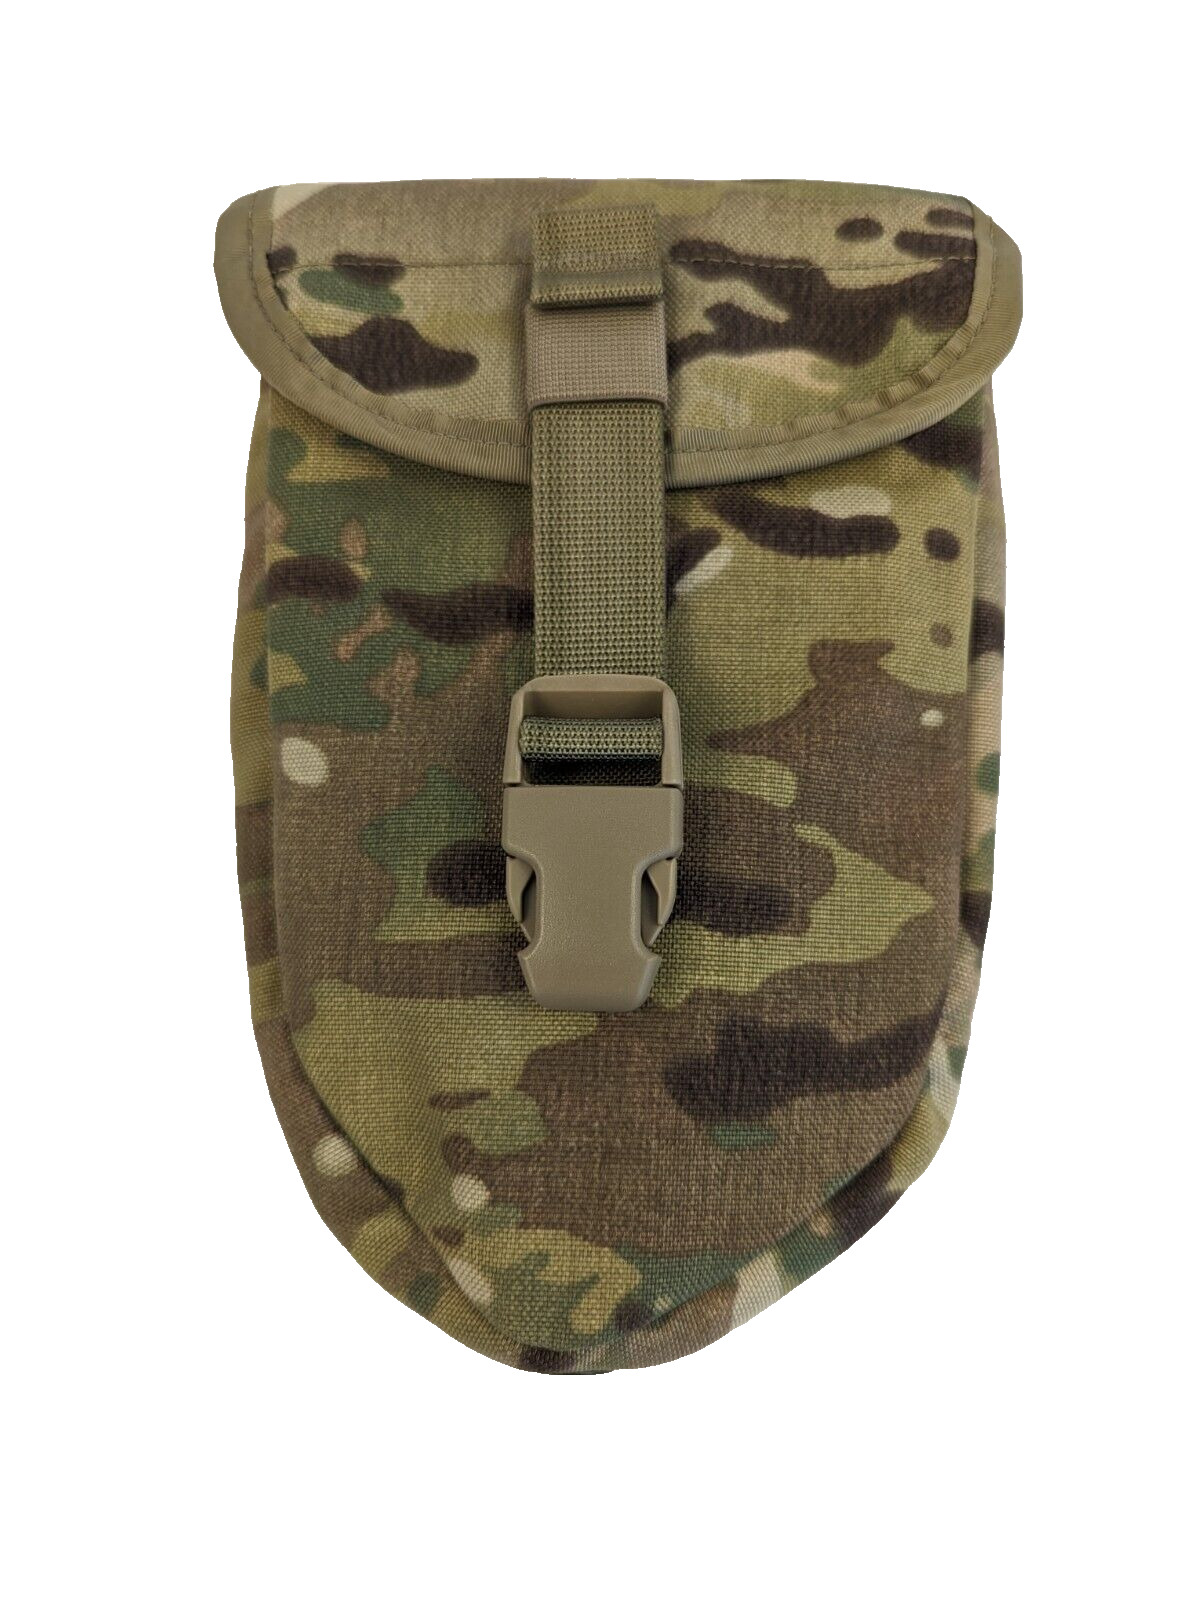 NEW USGI MOLLE II E-Tool Carrier Pouch Multicam OCP Camo Entrenching Tool Cover